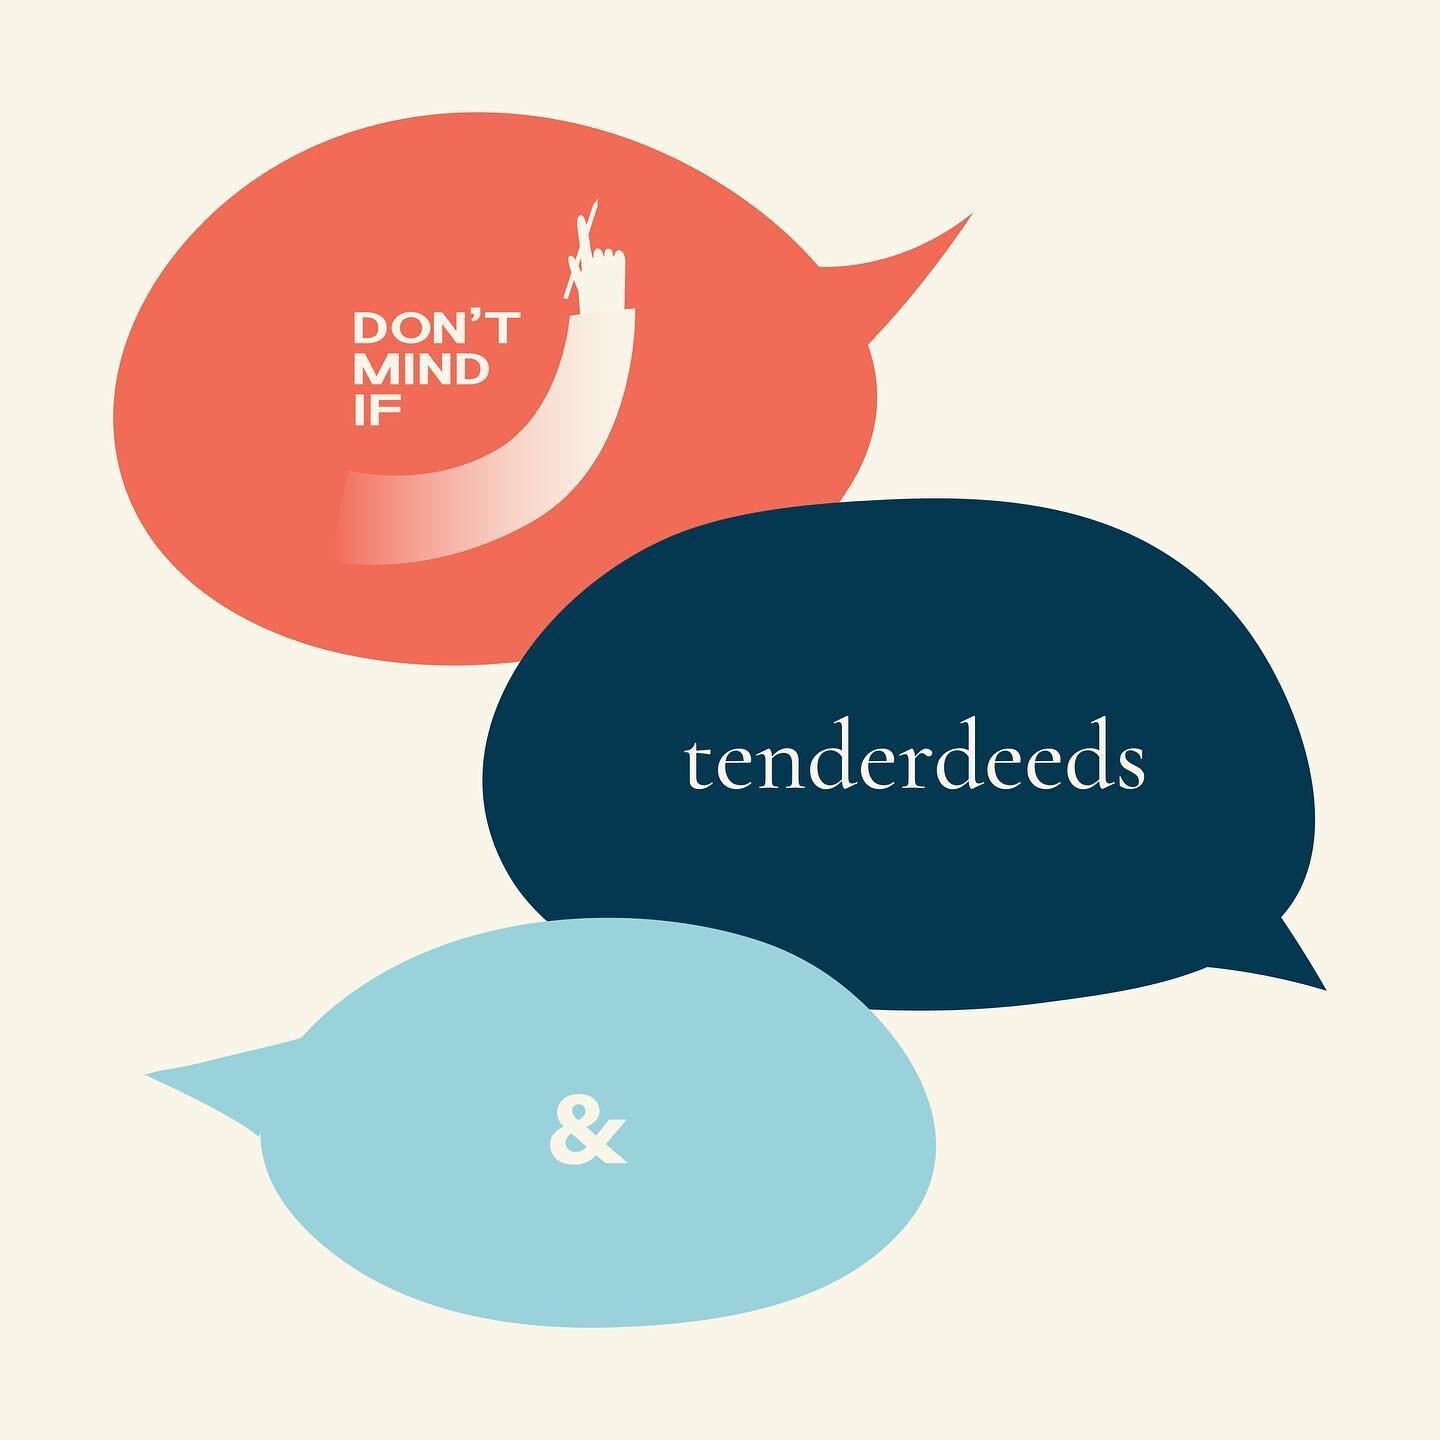 We&rsquo;re excited to be back with updates on an exciting collaboration with @tenderdeeds. Read more about it on our site https://www.dontmindif.com/articles